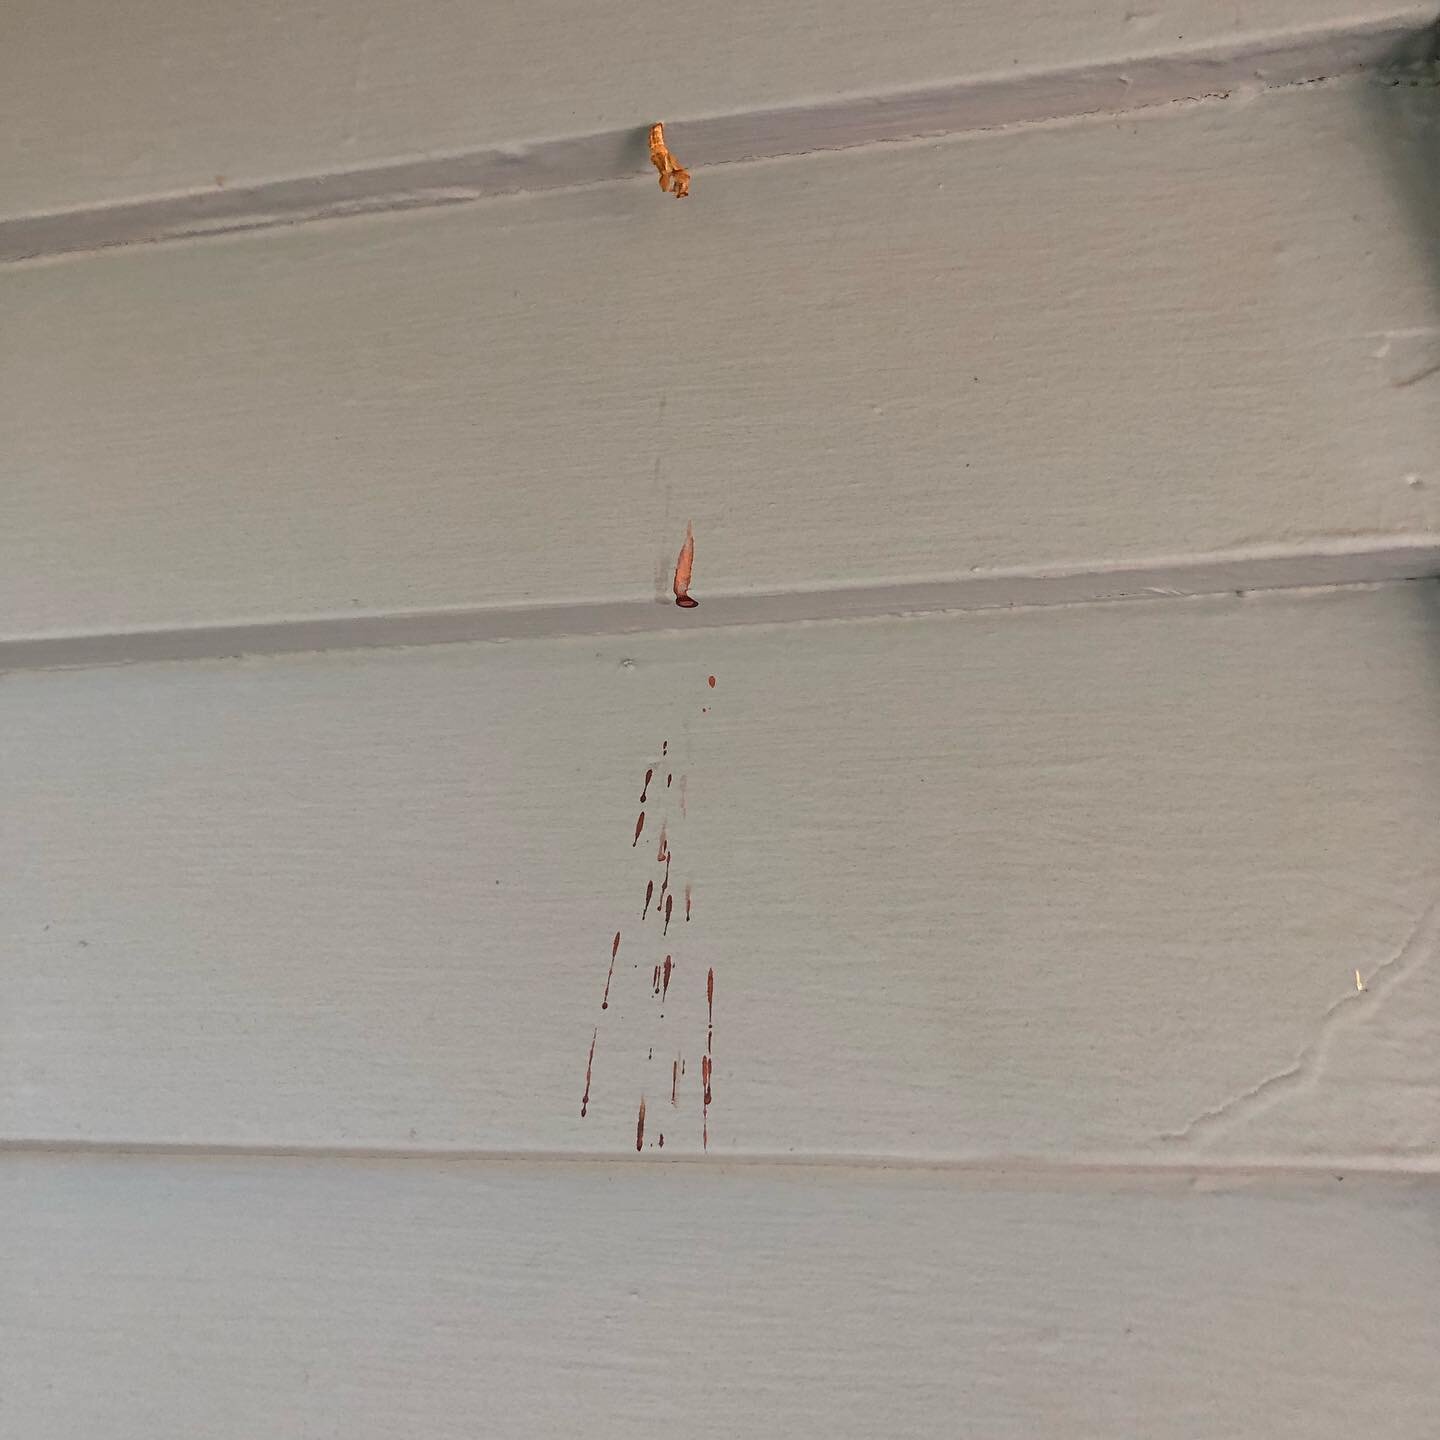 When you see this sort of splatter in the screened-in porch, you wonder if a butterfly has found its way off the porch yet. 

2021 is year 2 of Gulf fritillary residence at my home. Last year had 3 generations (caterpillar &mdash;&gt; chrysalis &mdas